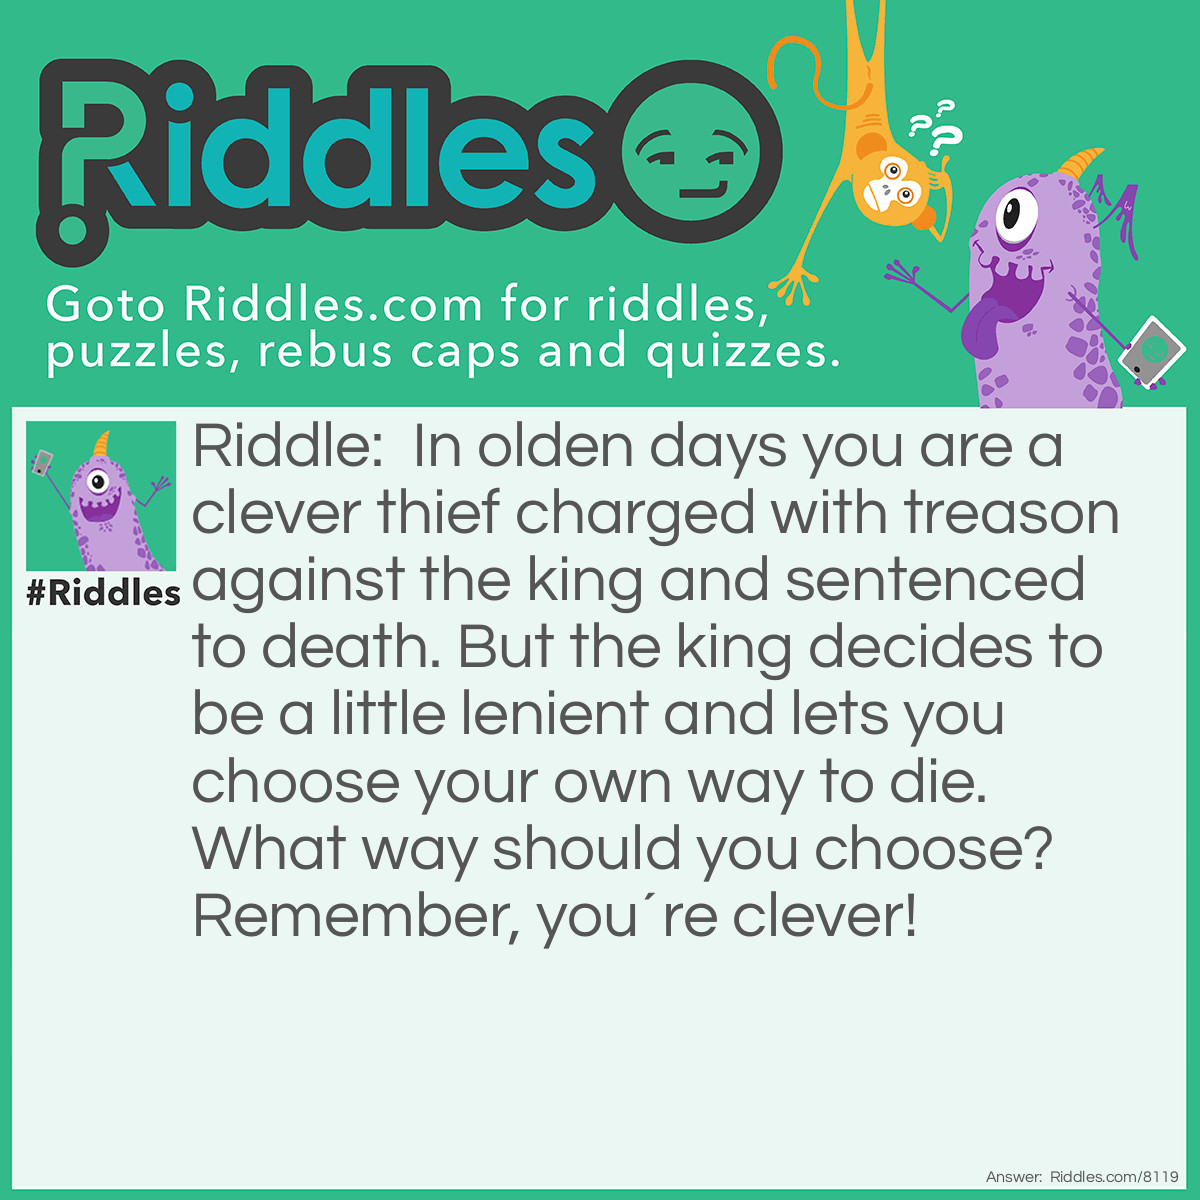 Riddle: In olden days you are a clever thief charged with treason against the king and sentenced to death. But the king decides to be a little lenient and lets you choose your own way to die. What way should you choose? Remember, you´re clever! Answer: You choose Old age.